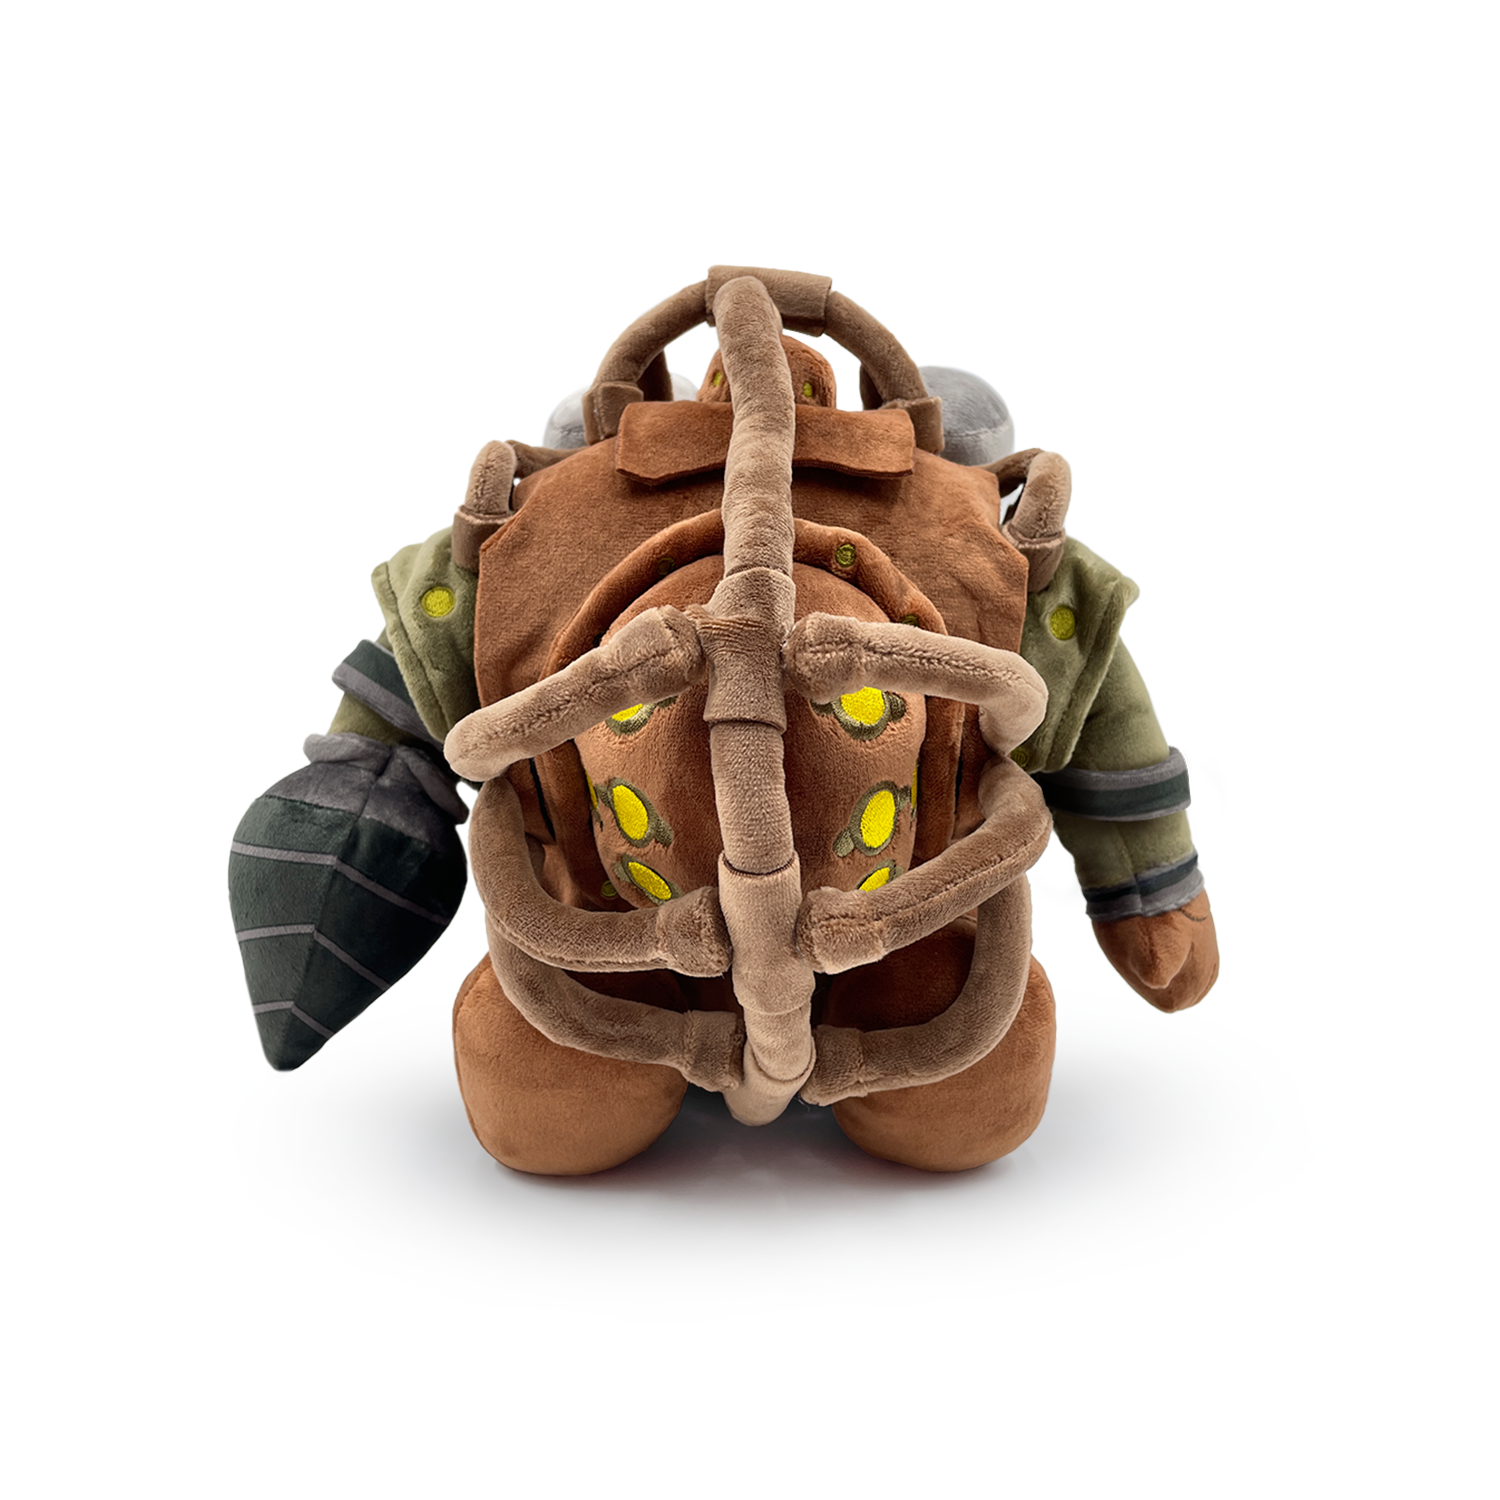 Big Daddy Plush (9in) – Youtooz Collectibles